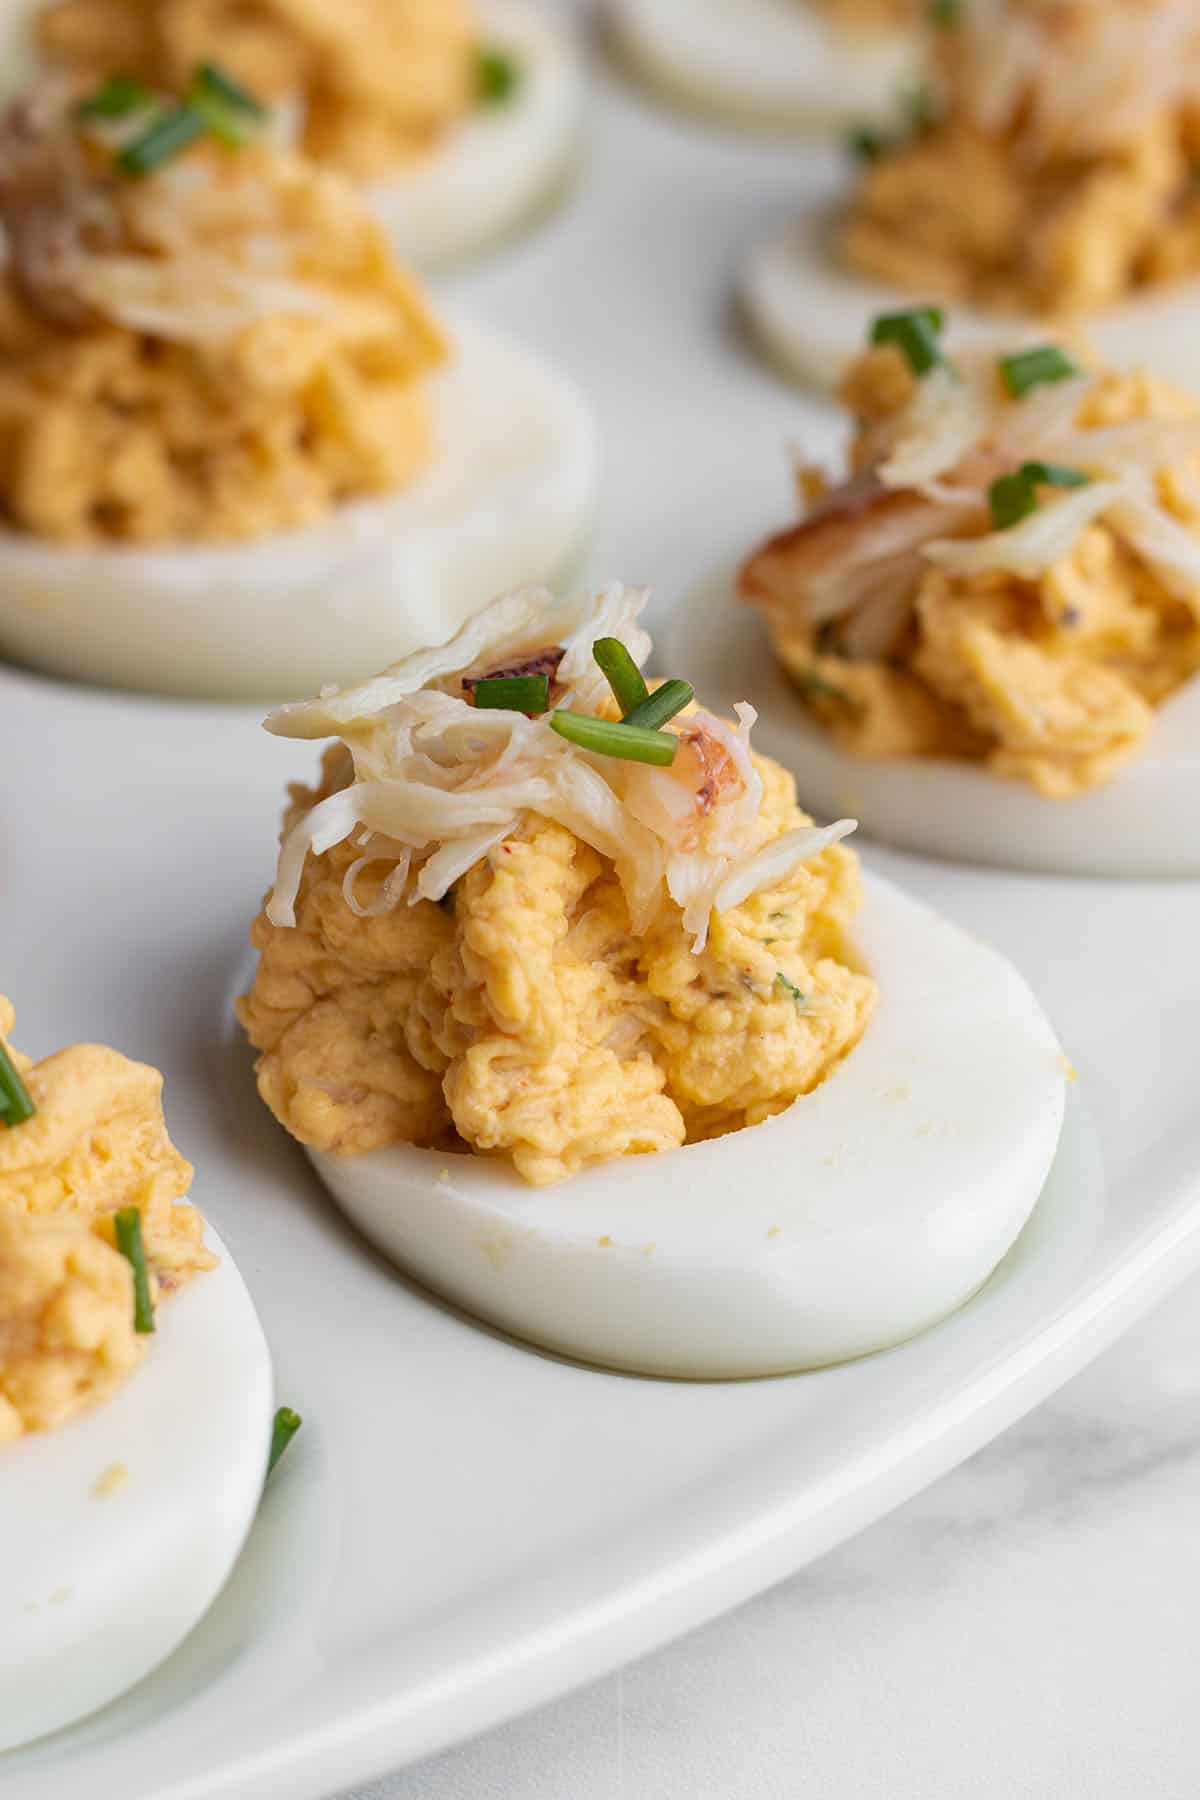 Egg plate with deviled eggs with crab on top.